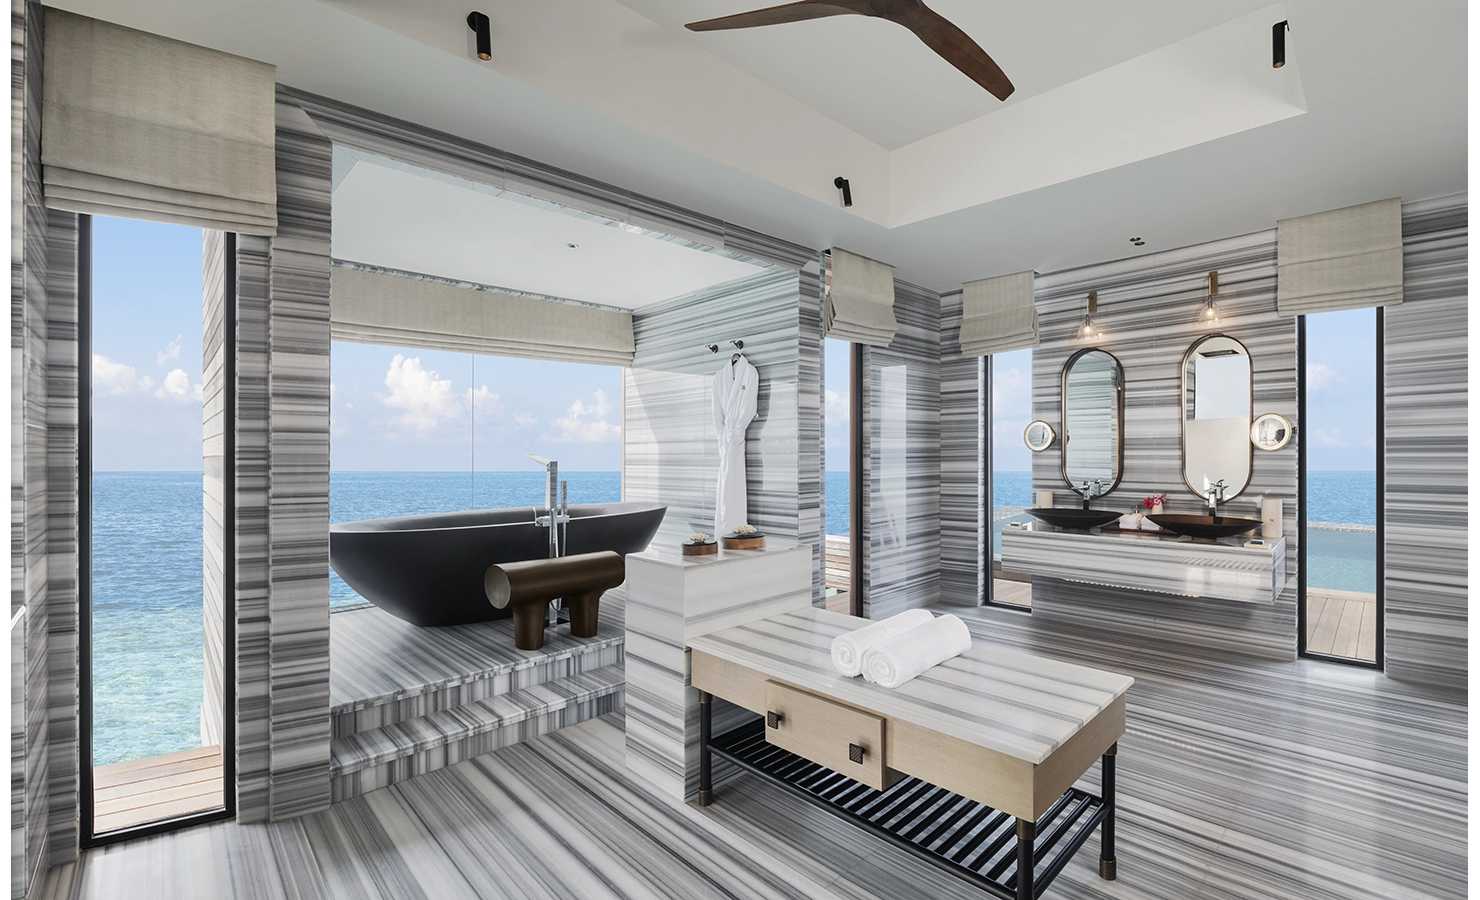 Perfect Hideaways, Waldorf Maldives, Luxury accommodation batroom with view ofthe ocean